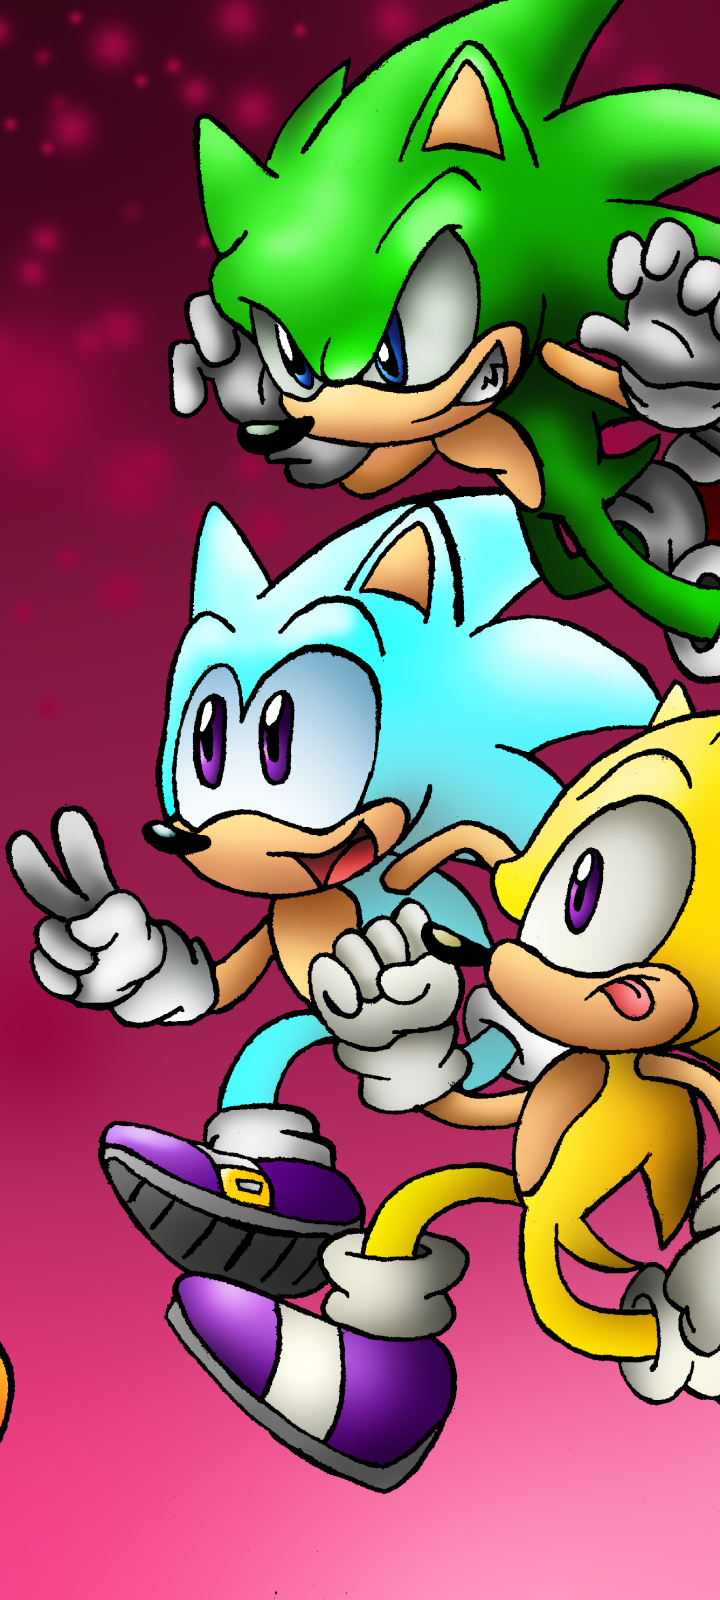 Sonic the Hedgehog Phone Wallpaper by SonicKnight007